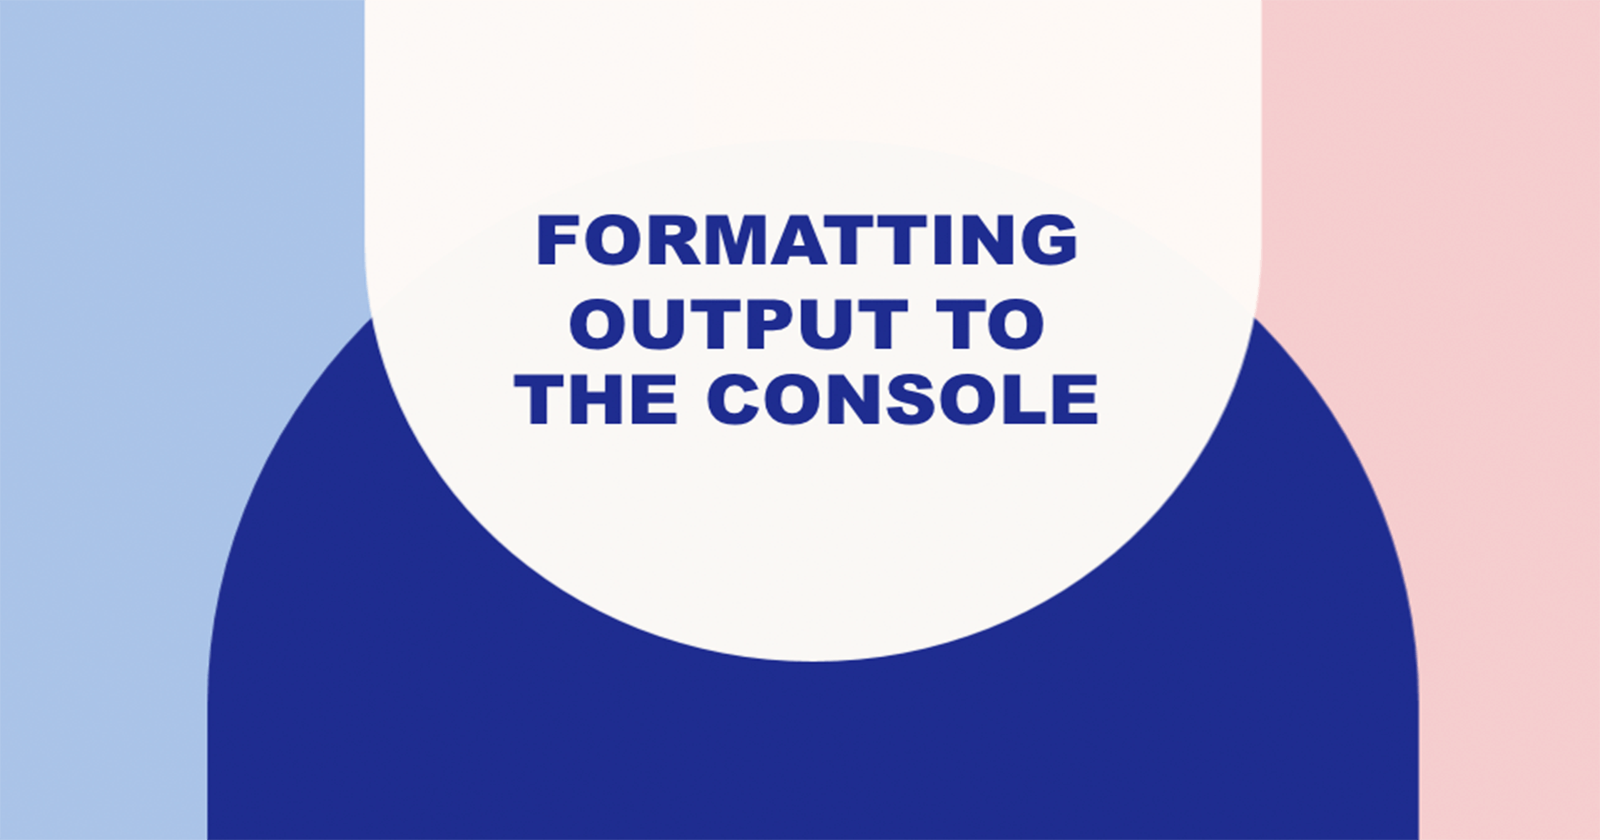 Formatting output to the console